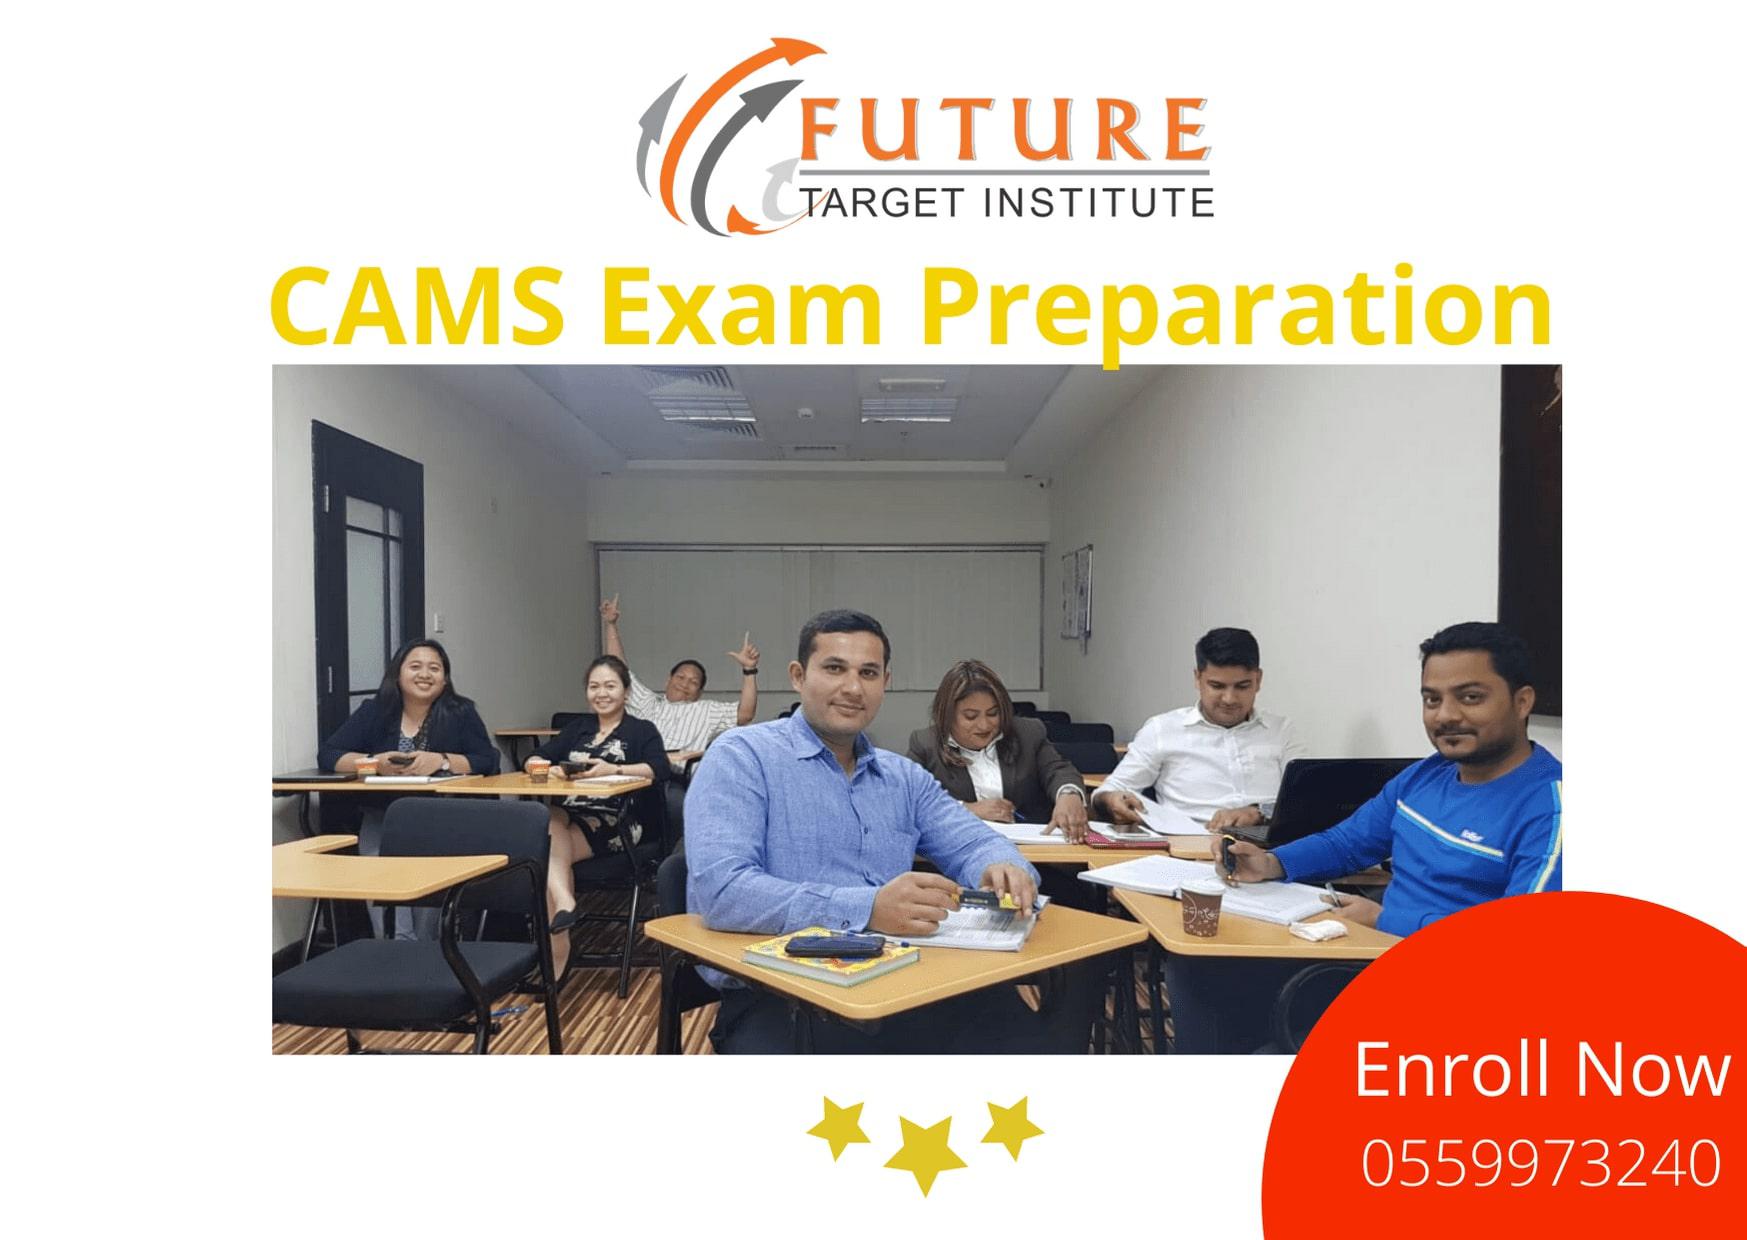 Our students who prepared for the Certified Anti-Money Laundering (CAMS) Exam in Dubai offered by ACAMS